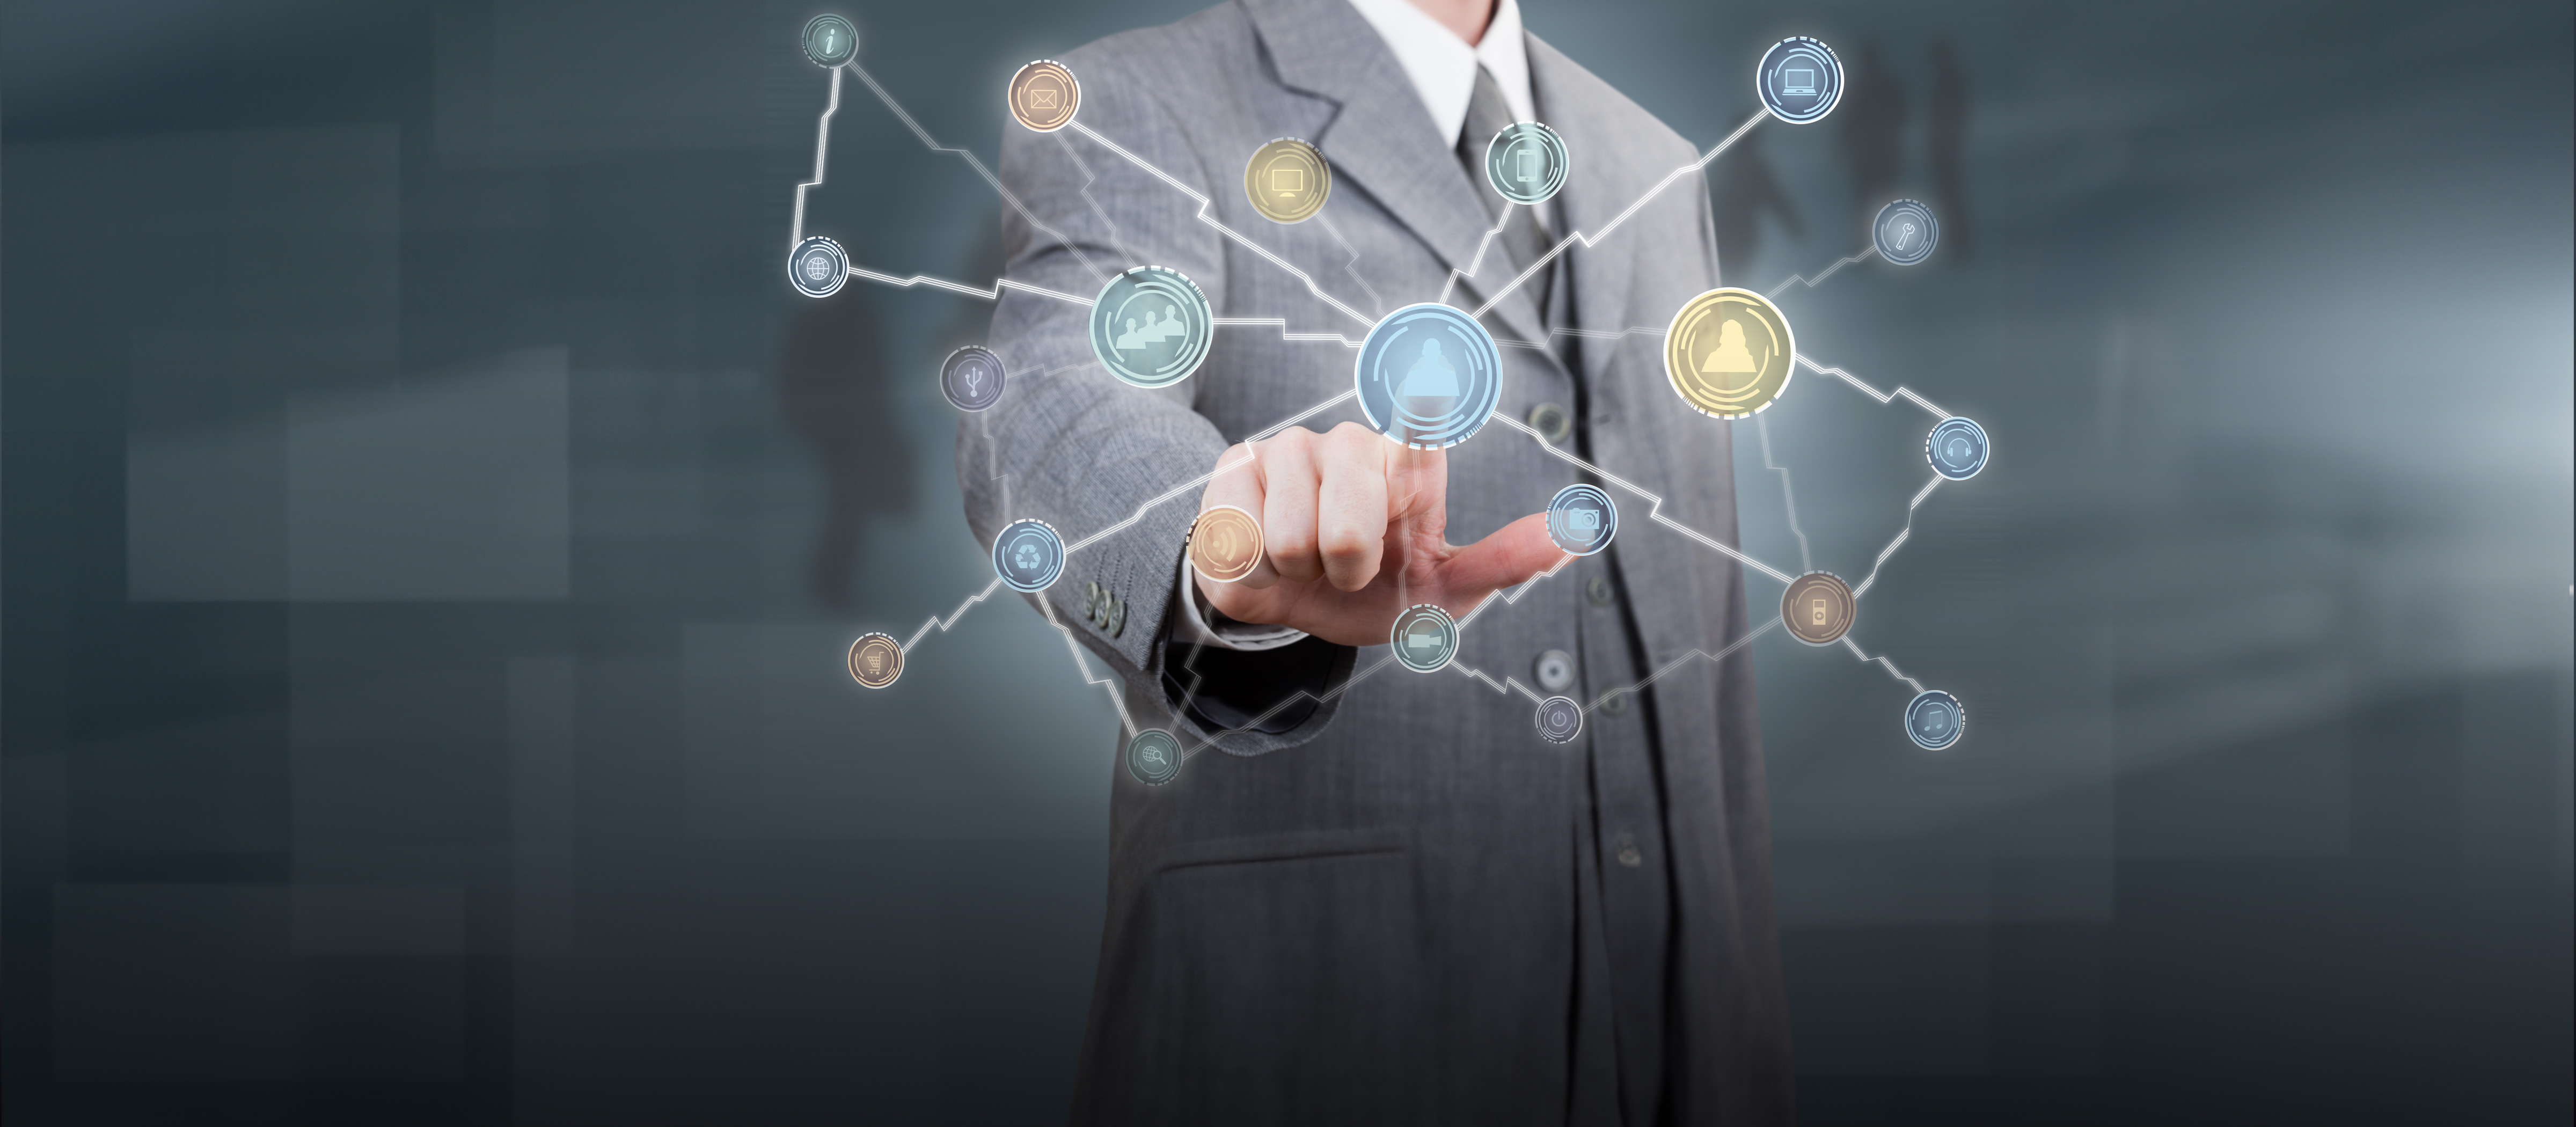 A man in a suit is pointing at a network of icons